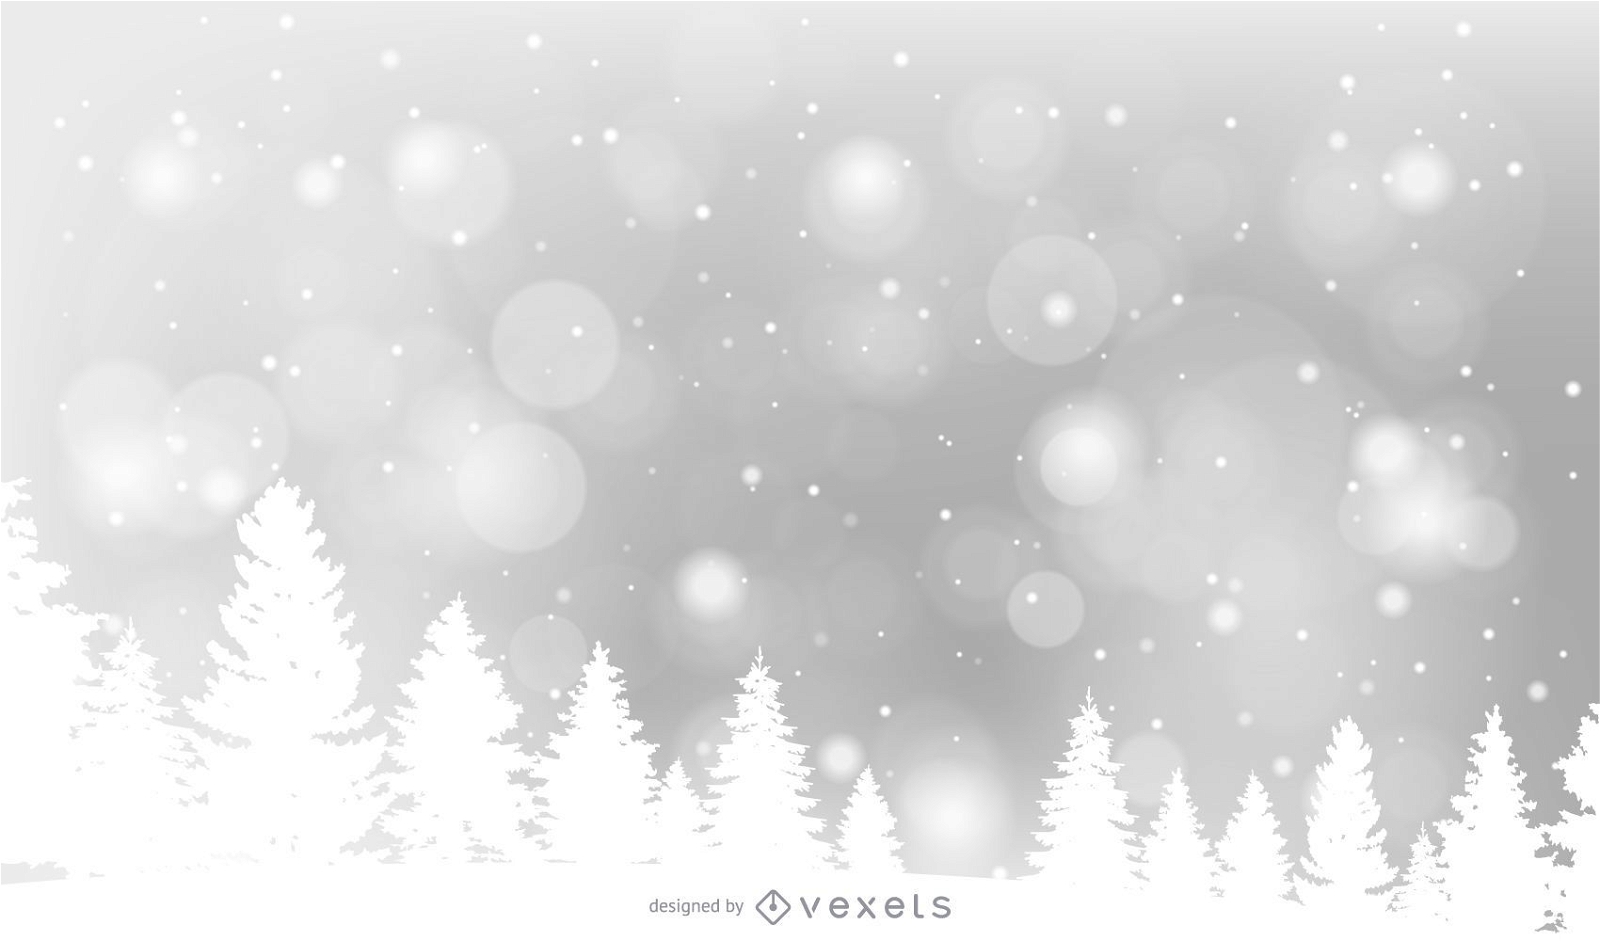 Snowy pine forest Christmas background